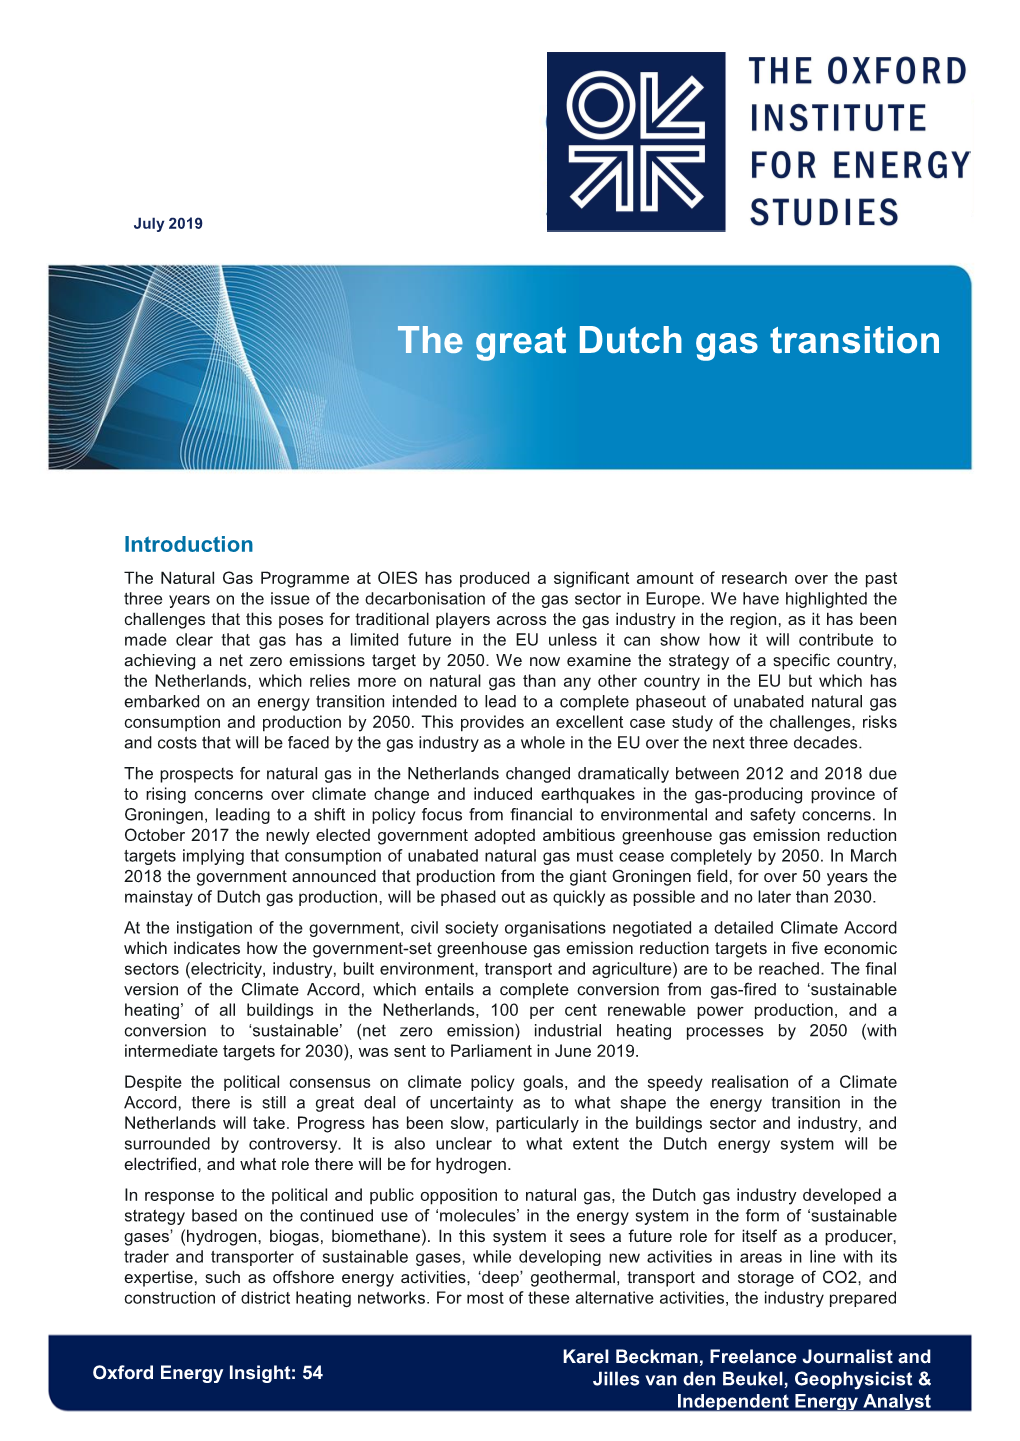 The Great Dutch Gas Transition